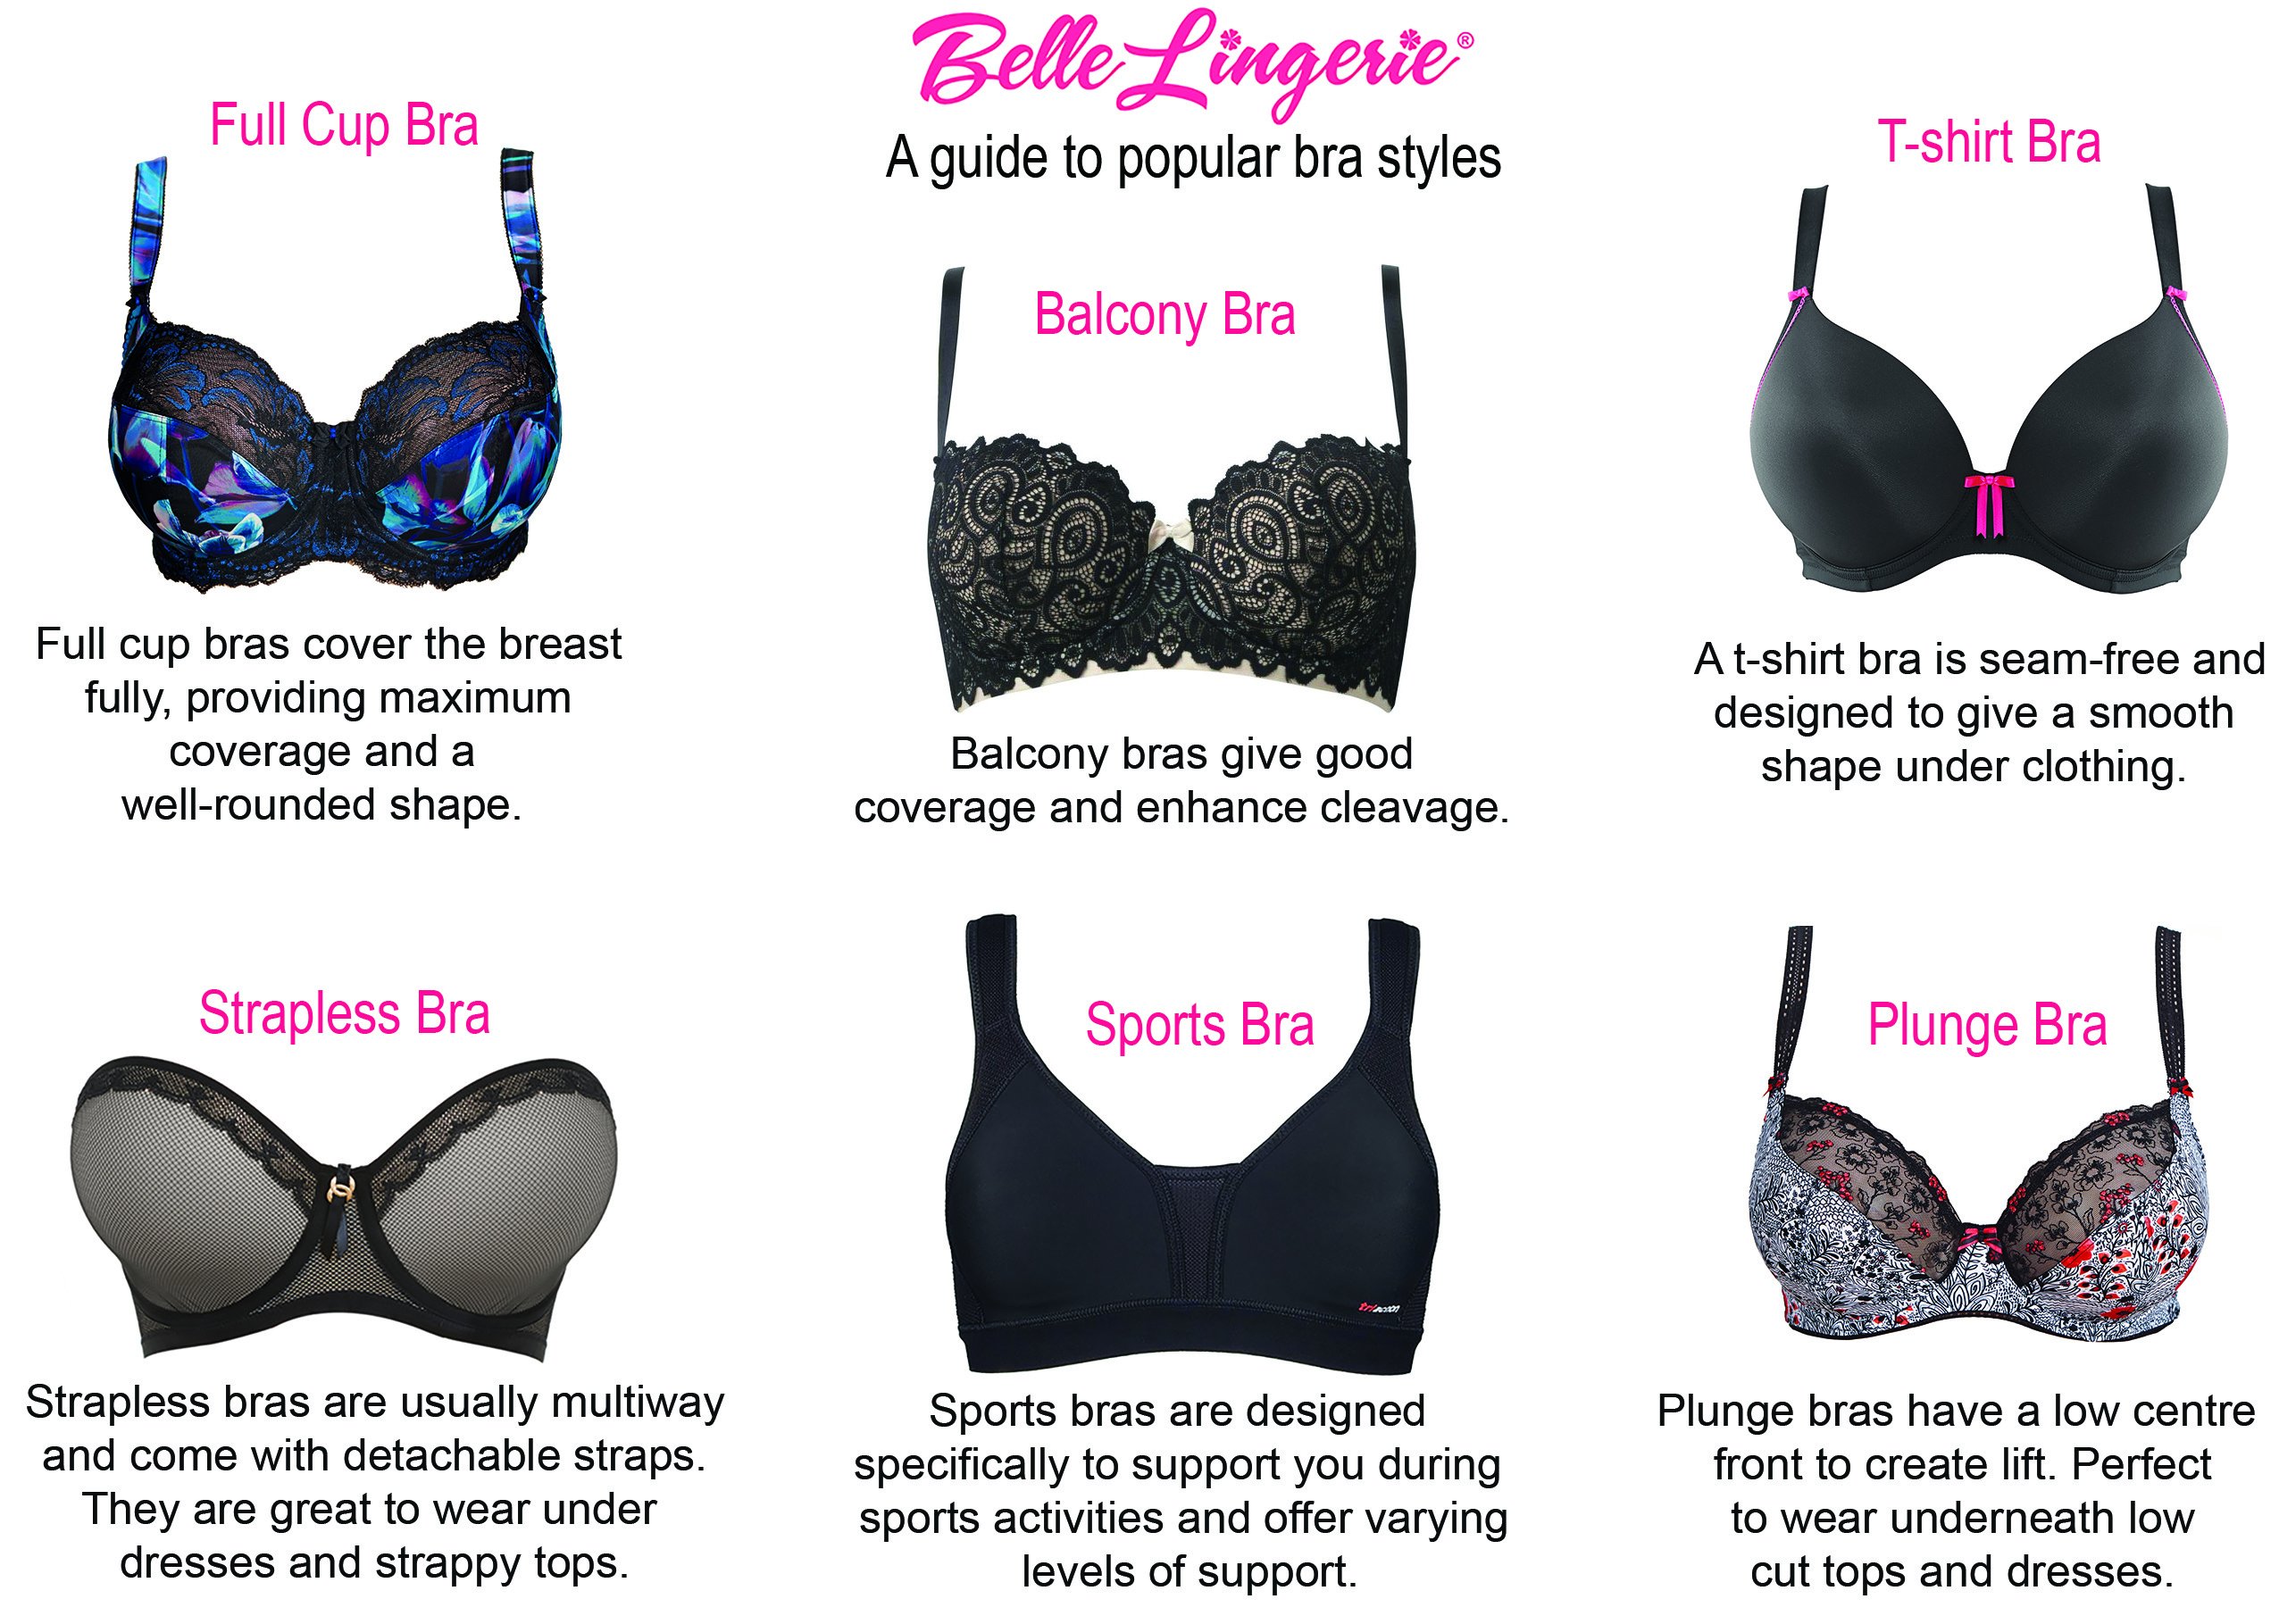 Belle Lingerie on X: For those of you who ask what #bra styles mean -  here's a handy guide to the most popular shapes. #BraGuide #BelleLingerie # Lingerie  / X